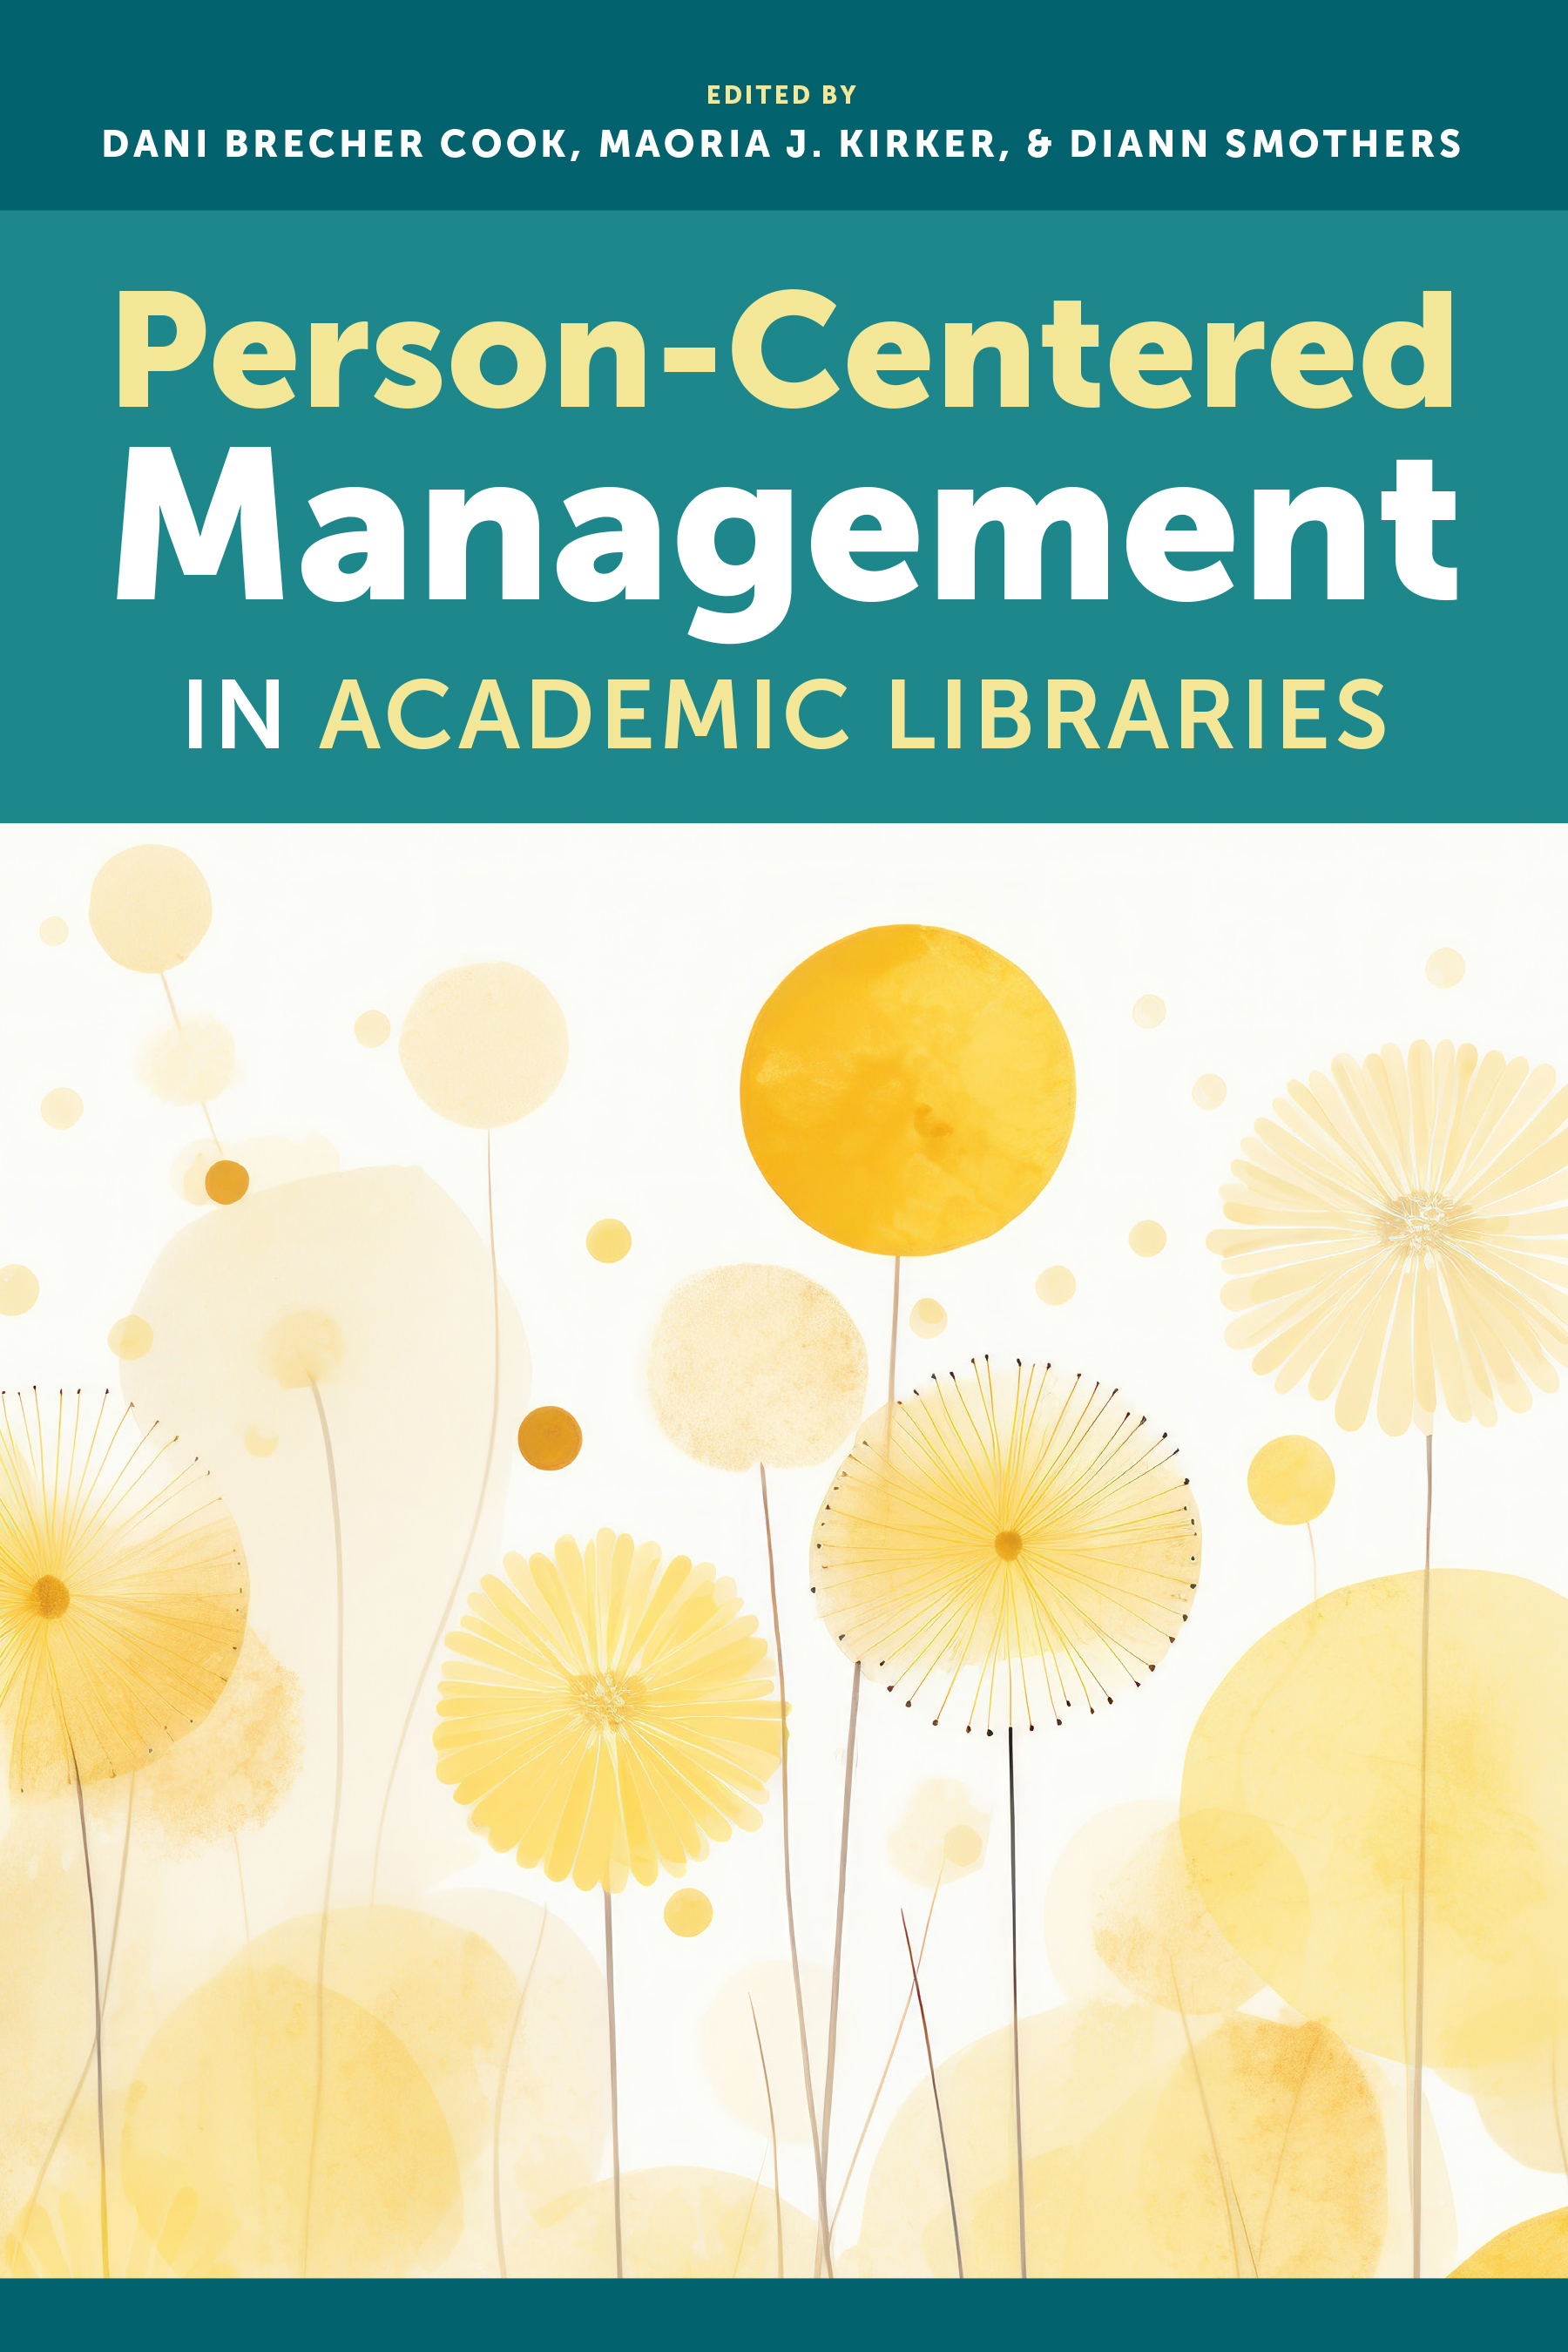 Person-Centered Management in Academic Libraries